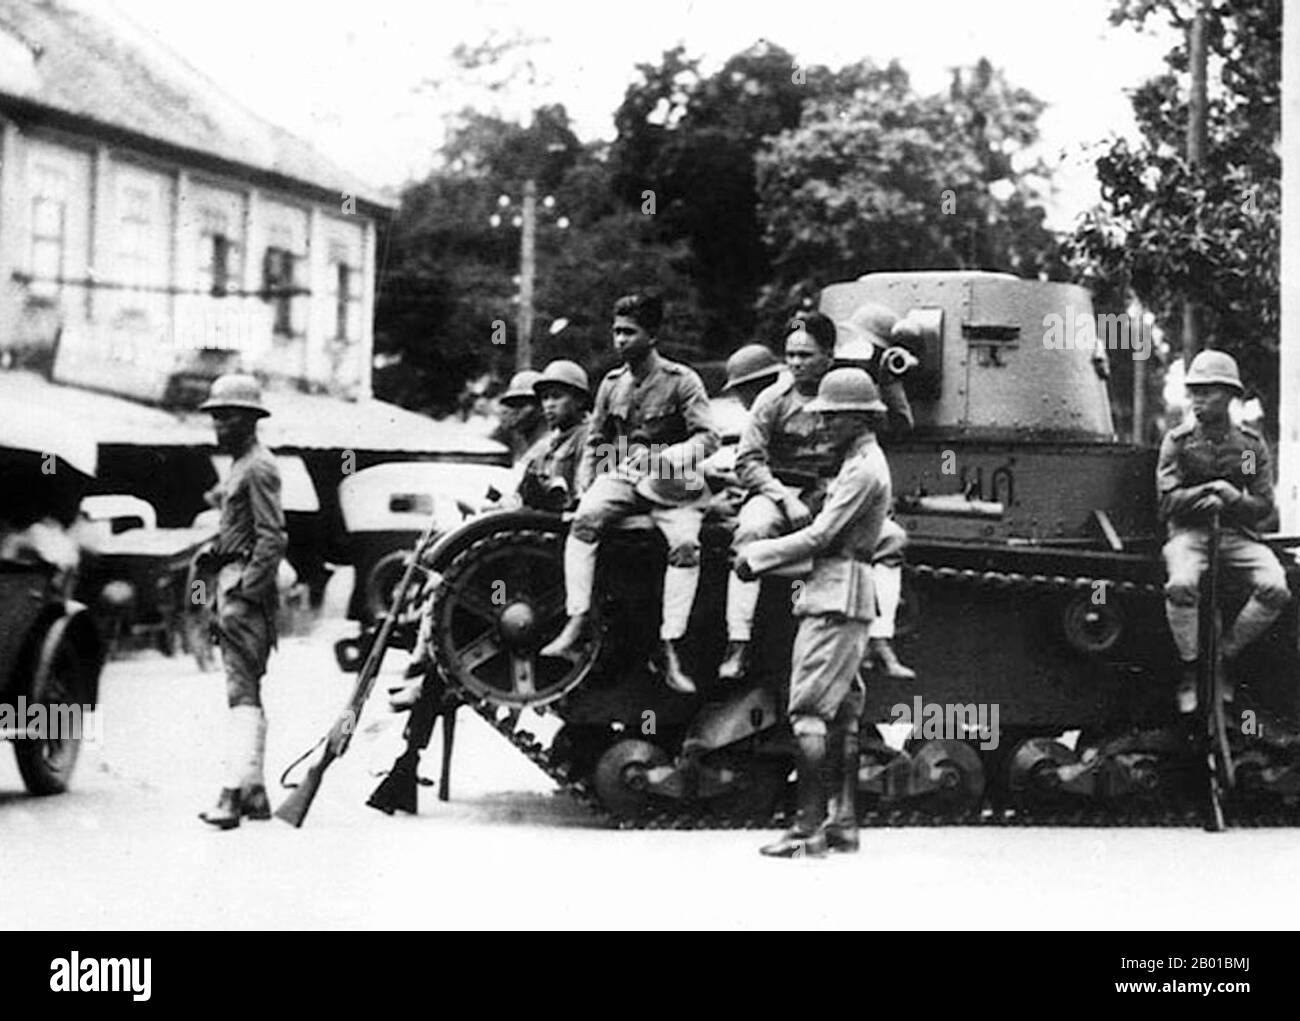 Thailand: Troops with a light tank on the streets of Bangkok after the democratic coup of 1932.  Before 1932, the Kingdom of Siam did not possess a legislature, as all legislative powers were vested in the person of the monarch. This has been the case since the foundation of the Sukhothai Kingdom in the 12th century, as the king was seen as a 'Dharmaraja' or King who rules in accordance with the Buddhist law of righteousness. However on 24 June 1932 a group of civilians and military officers, calling themselves the Khana Ratsadon (or People's Party) carried out a bloodless revolution. Stock Photo